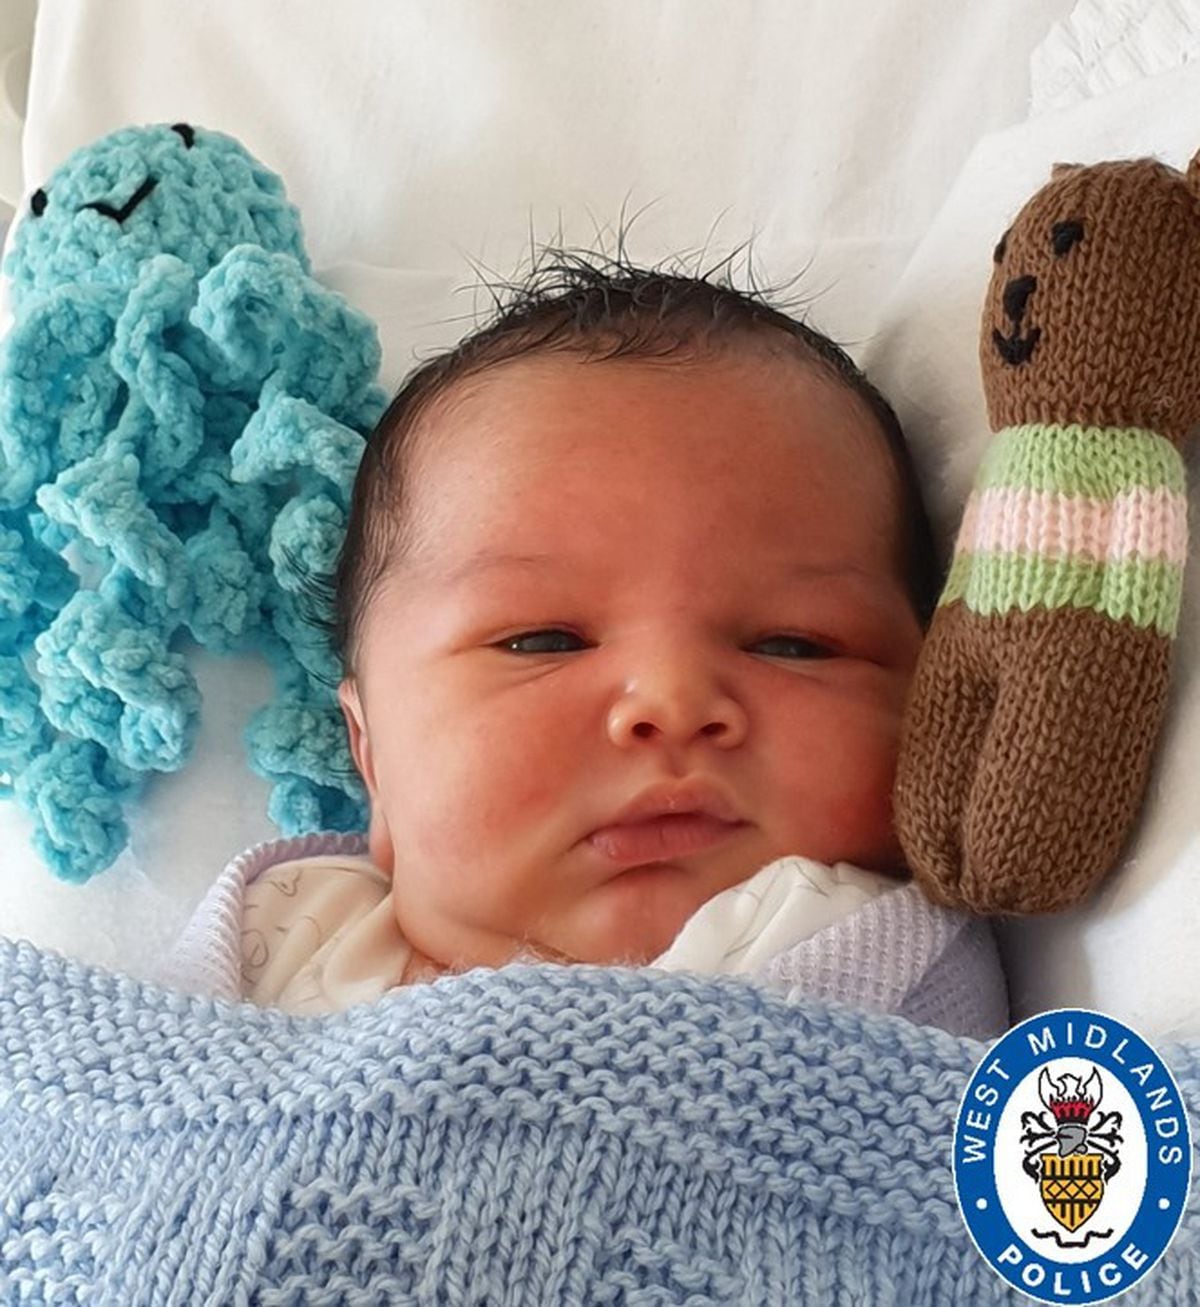 Police believe George was only hours old when he was found